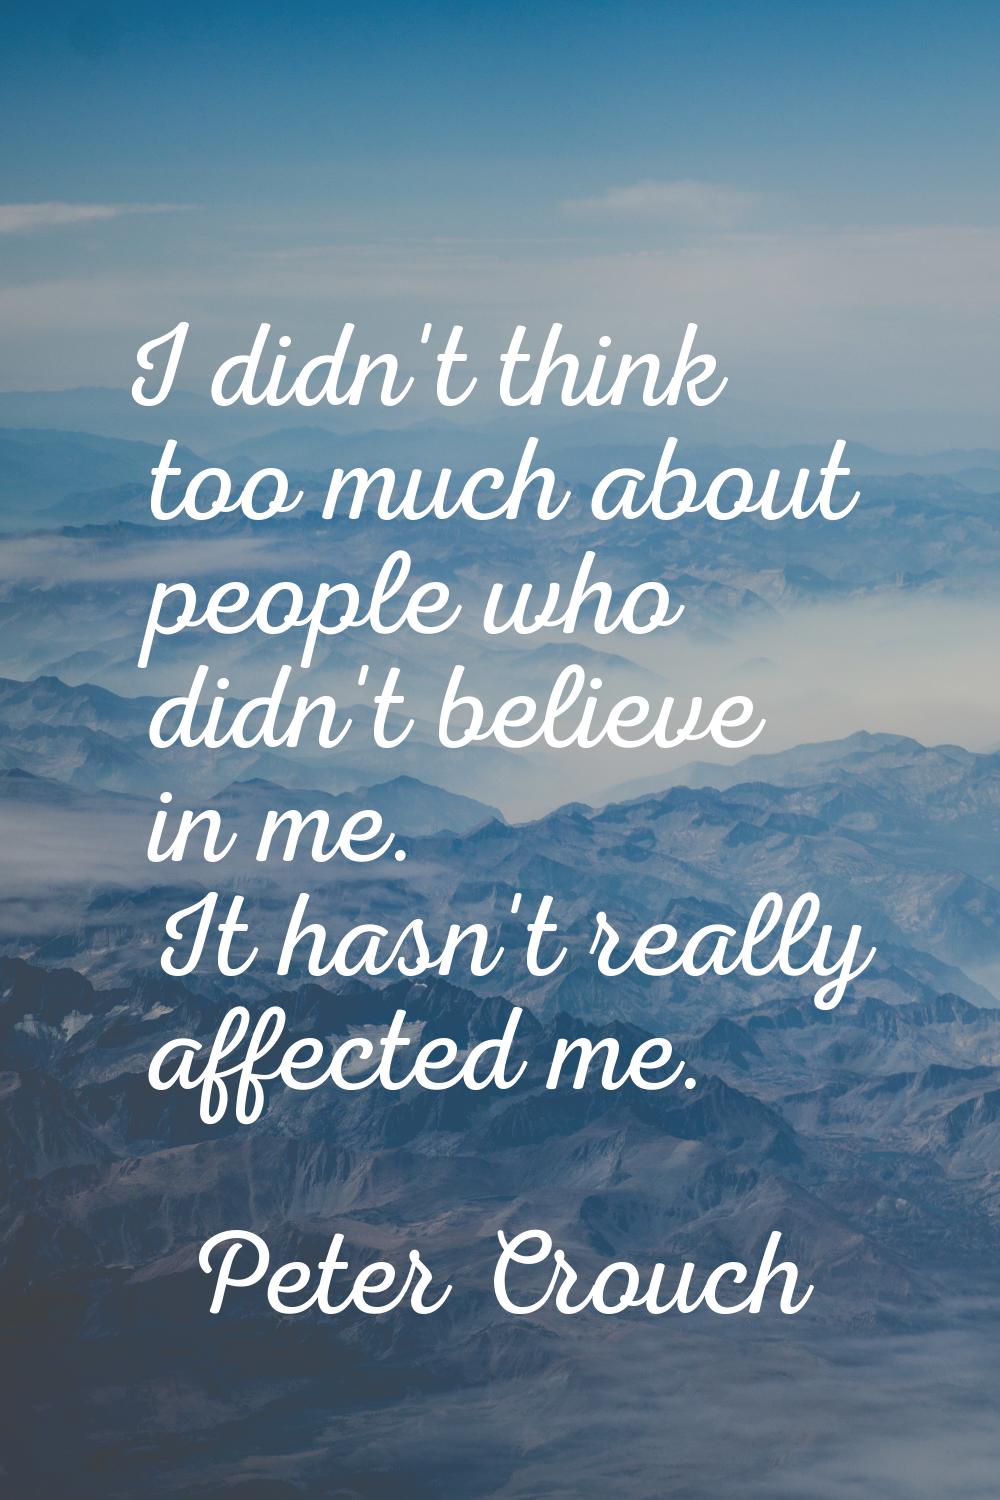 I didn't think too much about people who didn't believe in me. It hasn't really affected me.